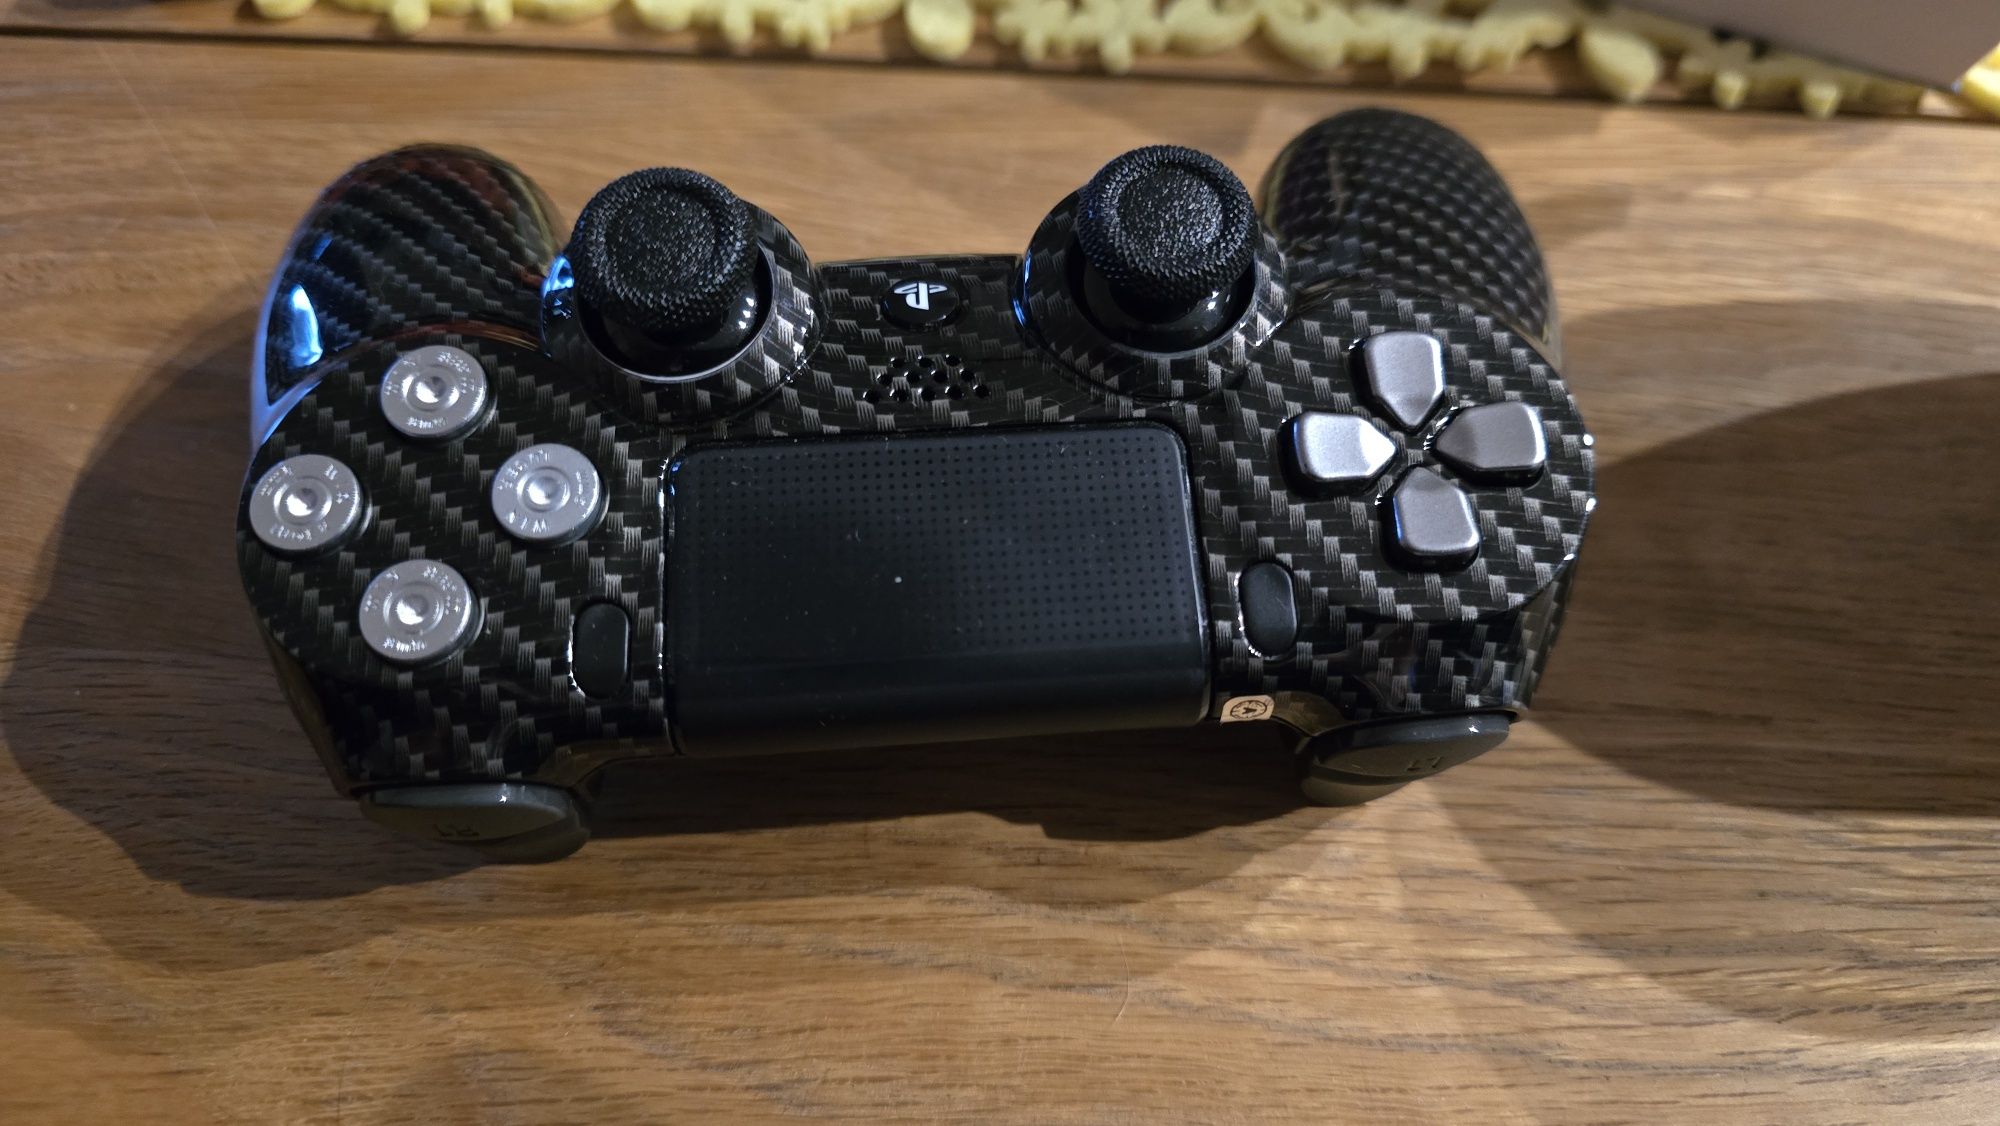 Kontroler ps4 od AIM controllers do ps4